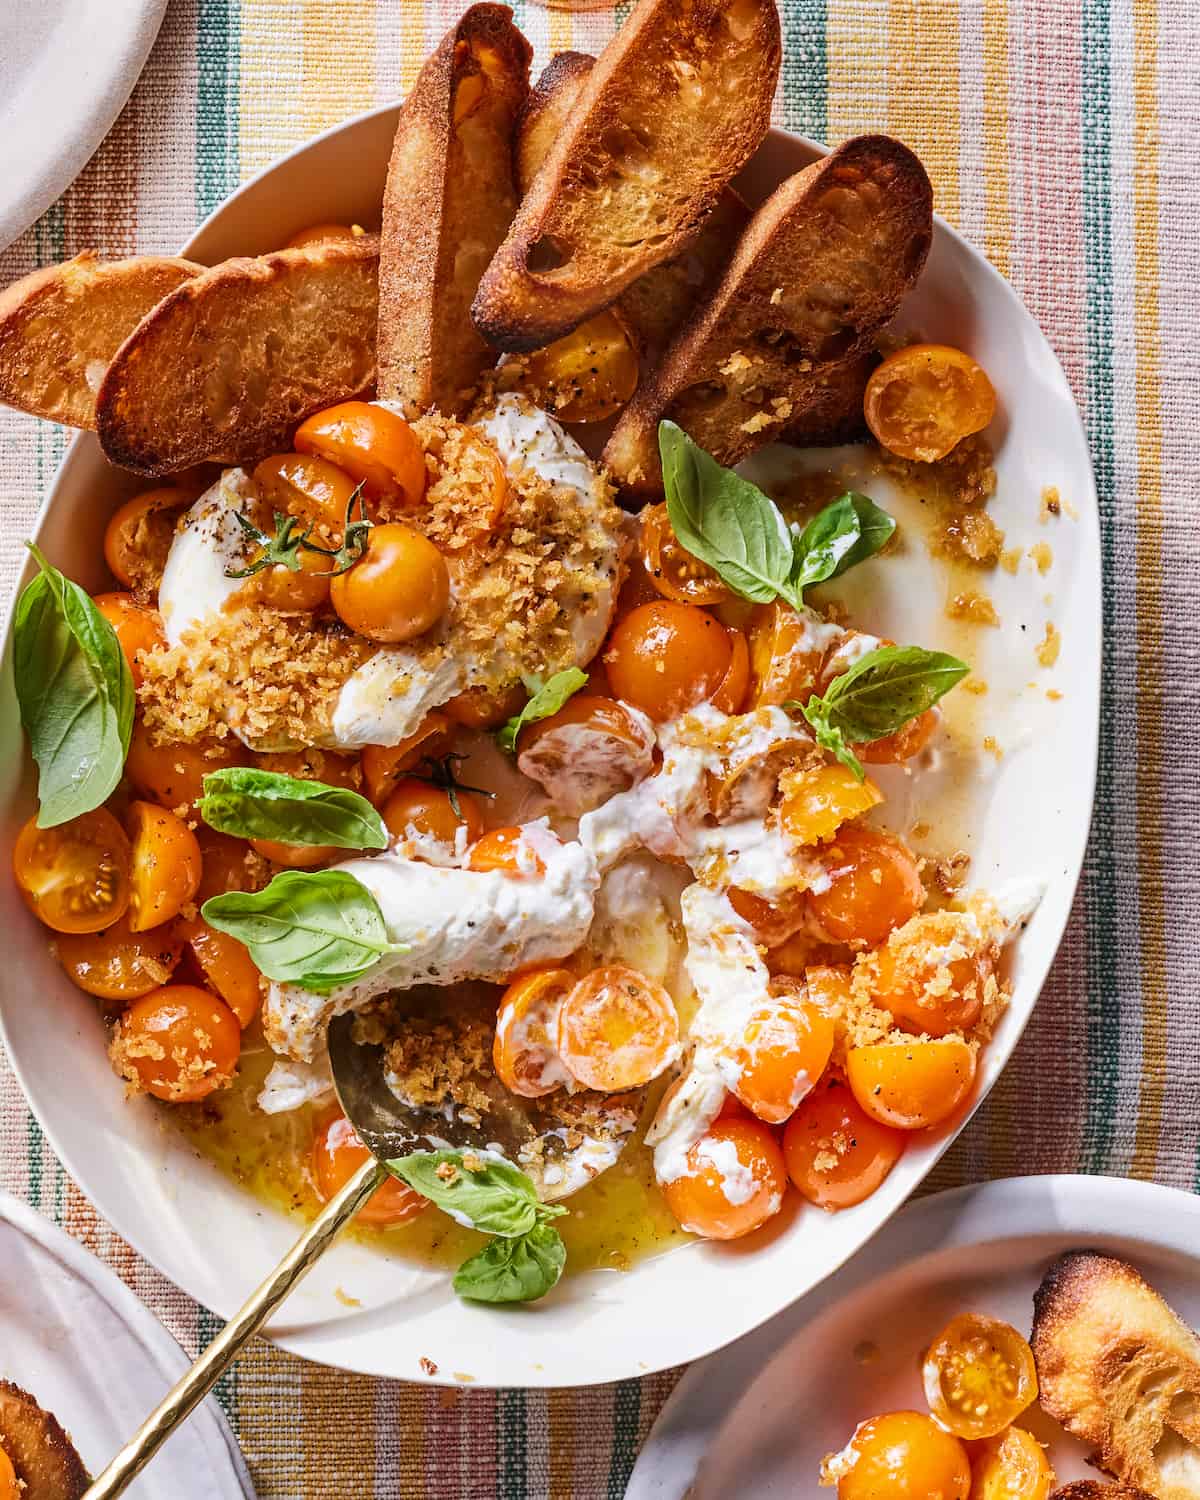 A plate with halved cherry tomatoes, balls of burrata, slices of toasted bred, and leaves of basil.  